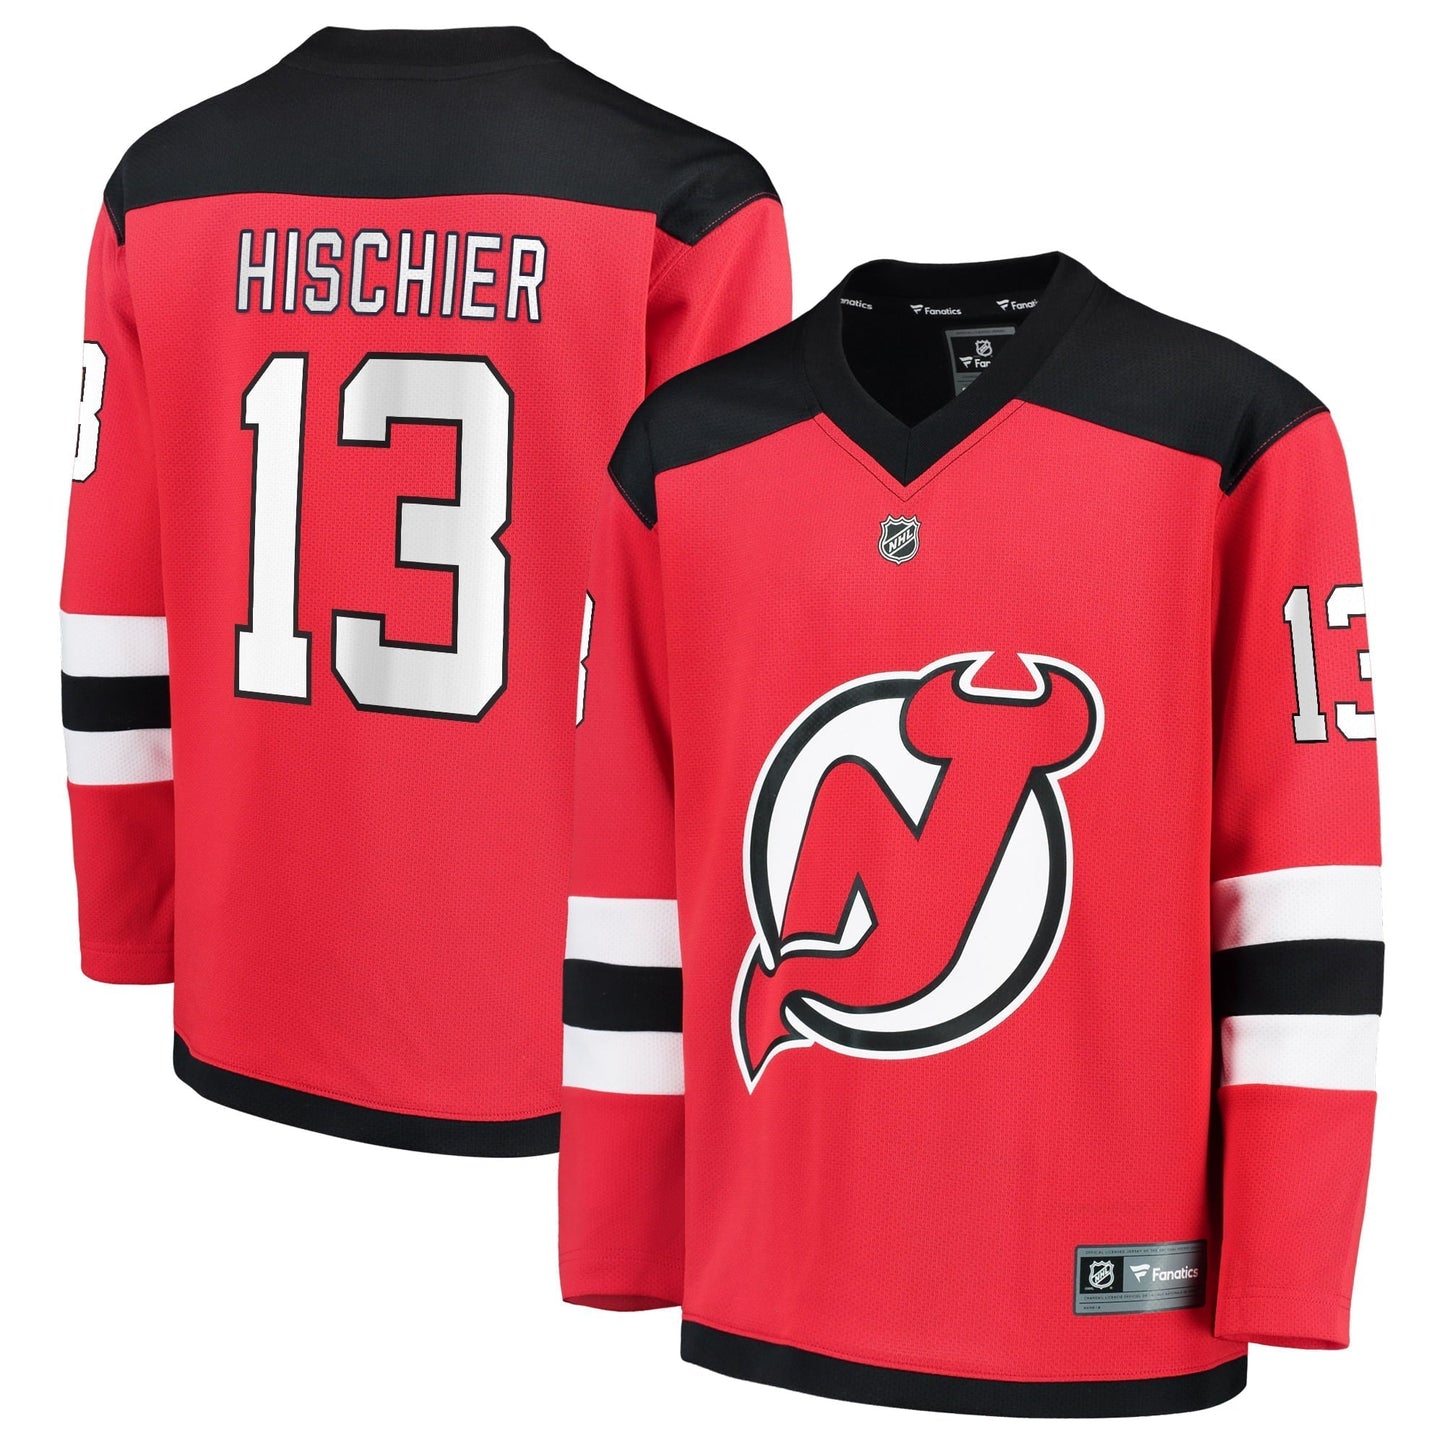 Youth Fanatics Branded Nico Hischier Red New Jersey Devils Replica Player Jersey